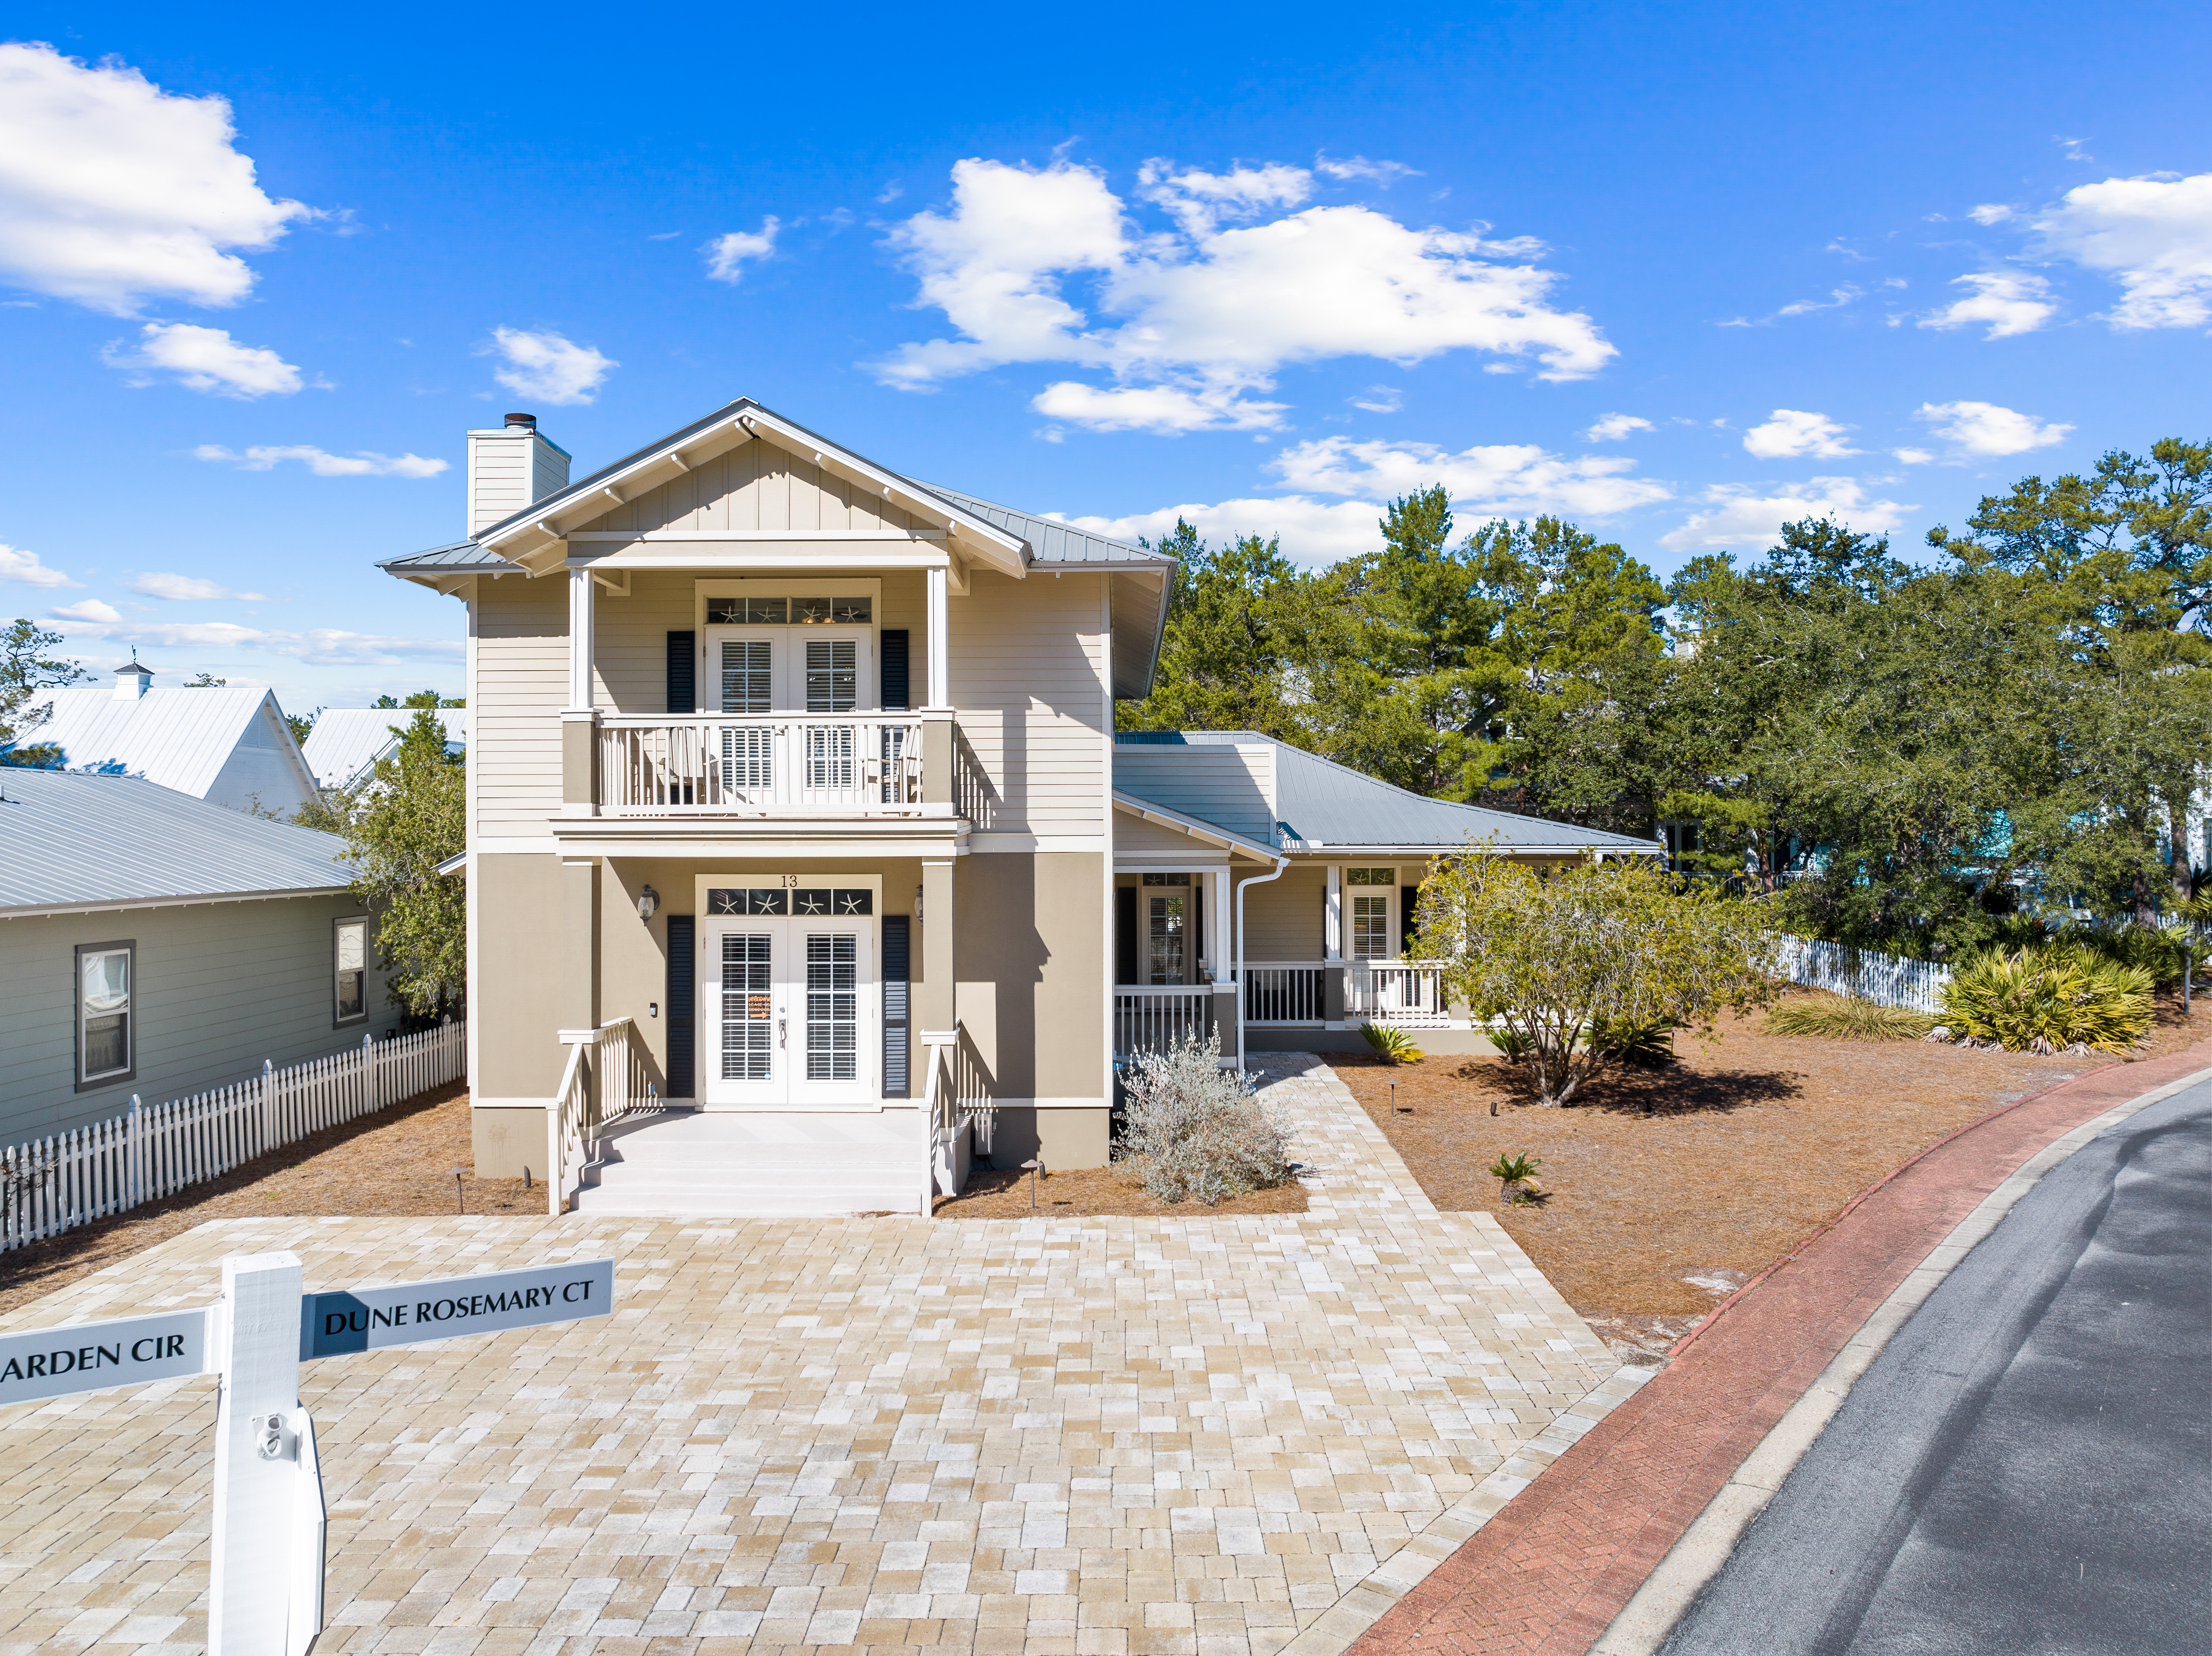 Large Beach Home With Multiple Porches On Oversized Lot